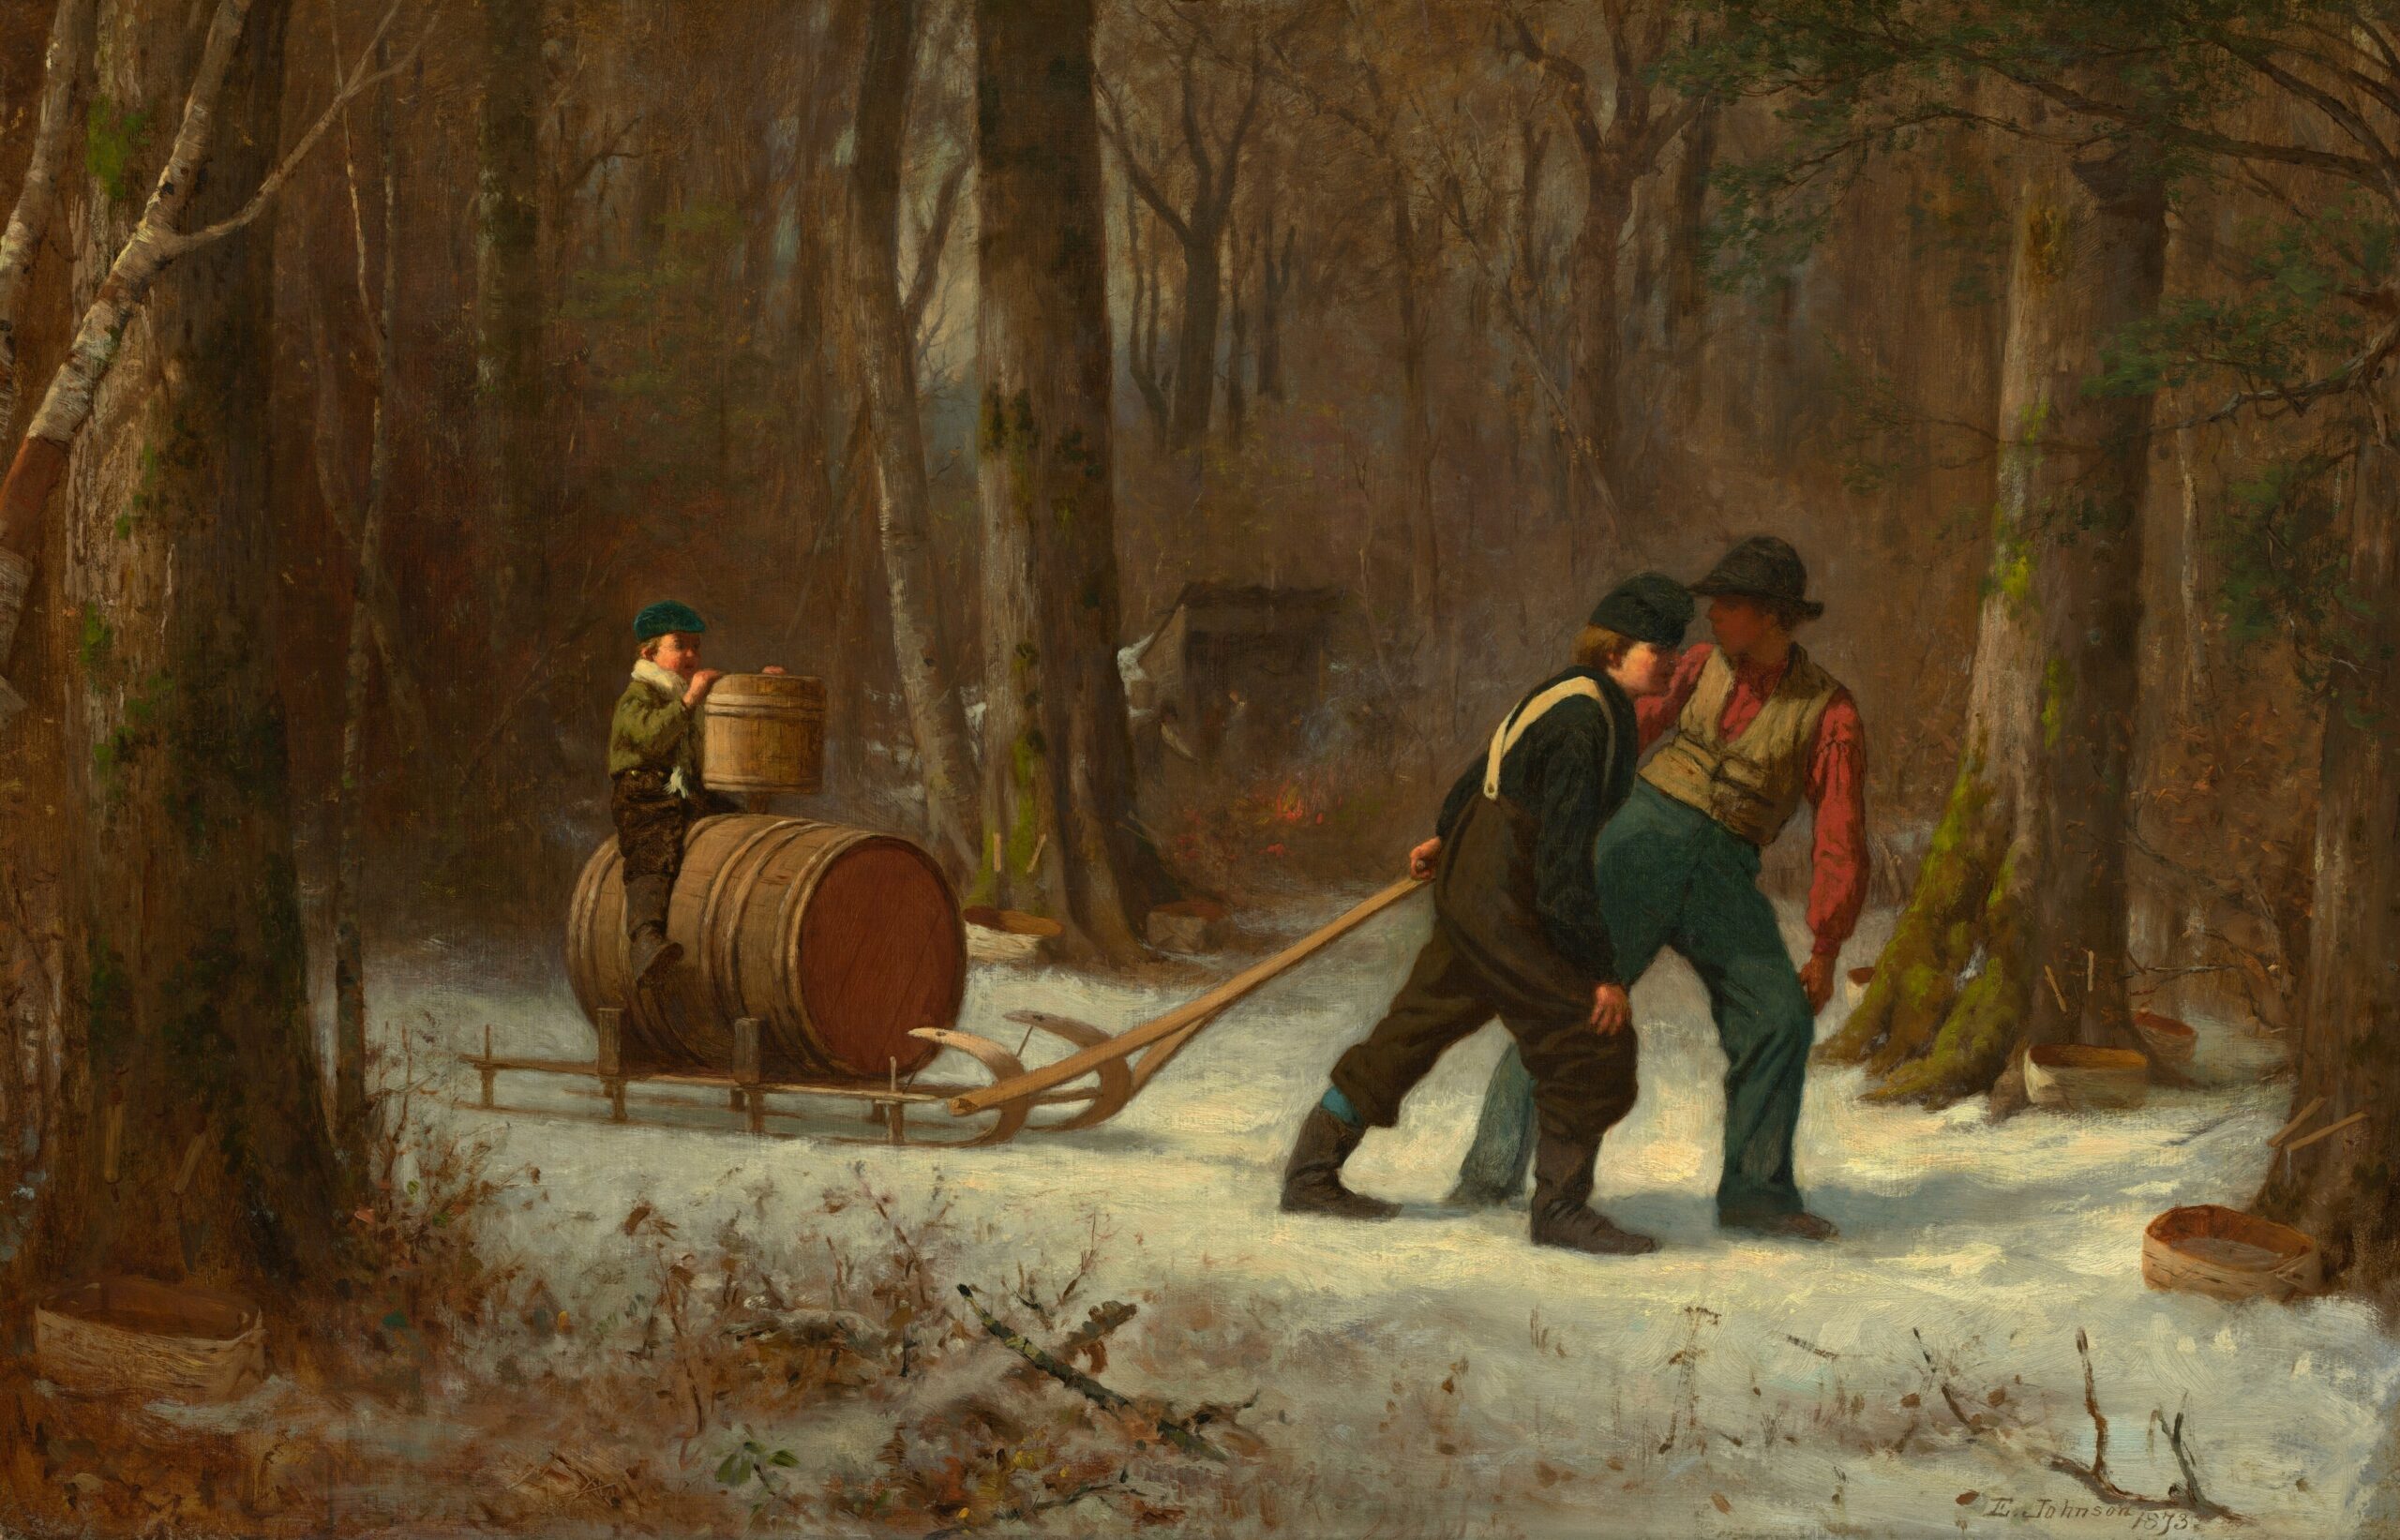 Boys in the forest in the winter collecting maple sap